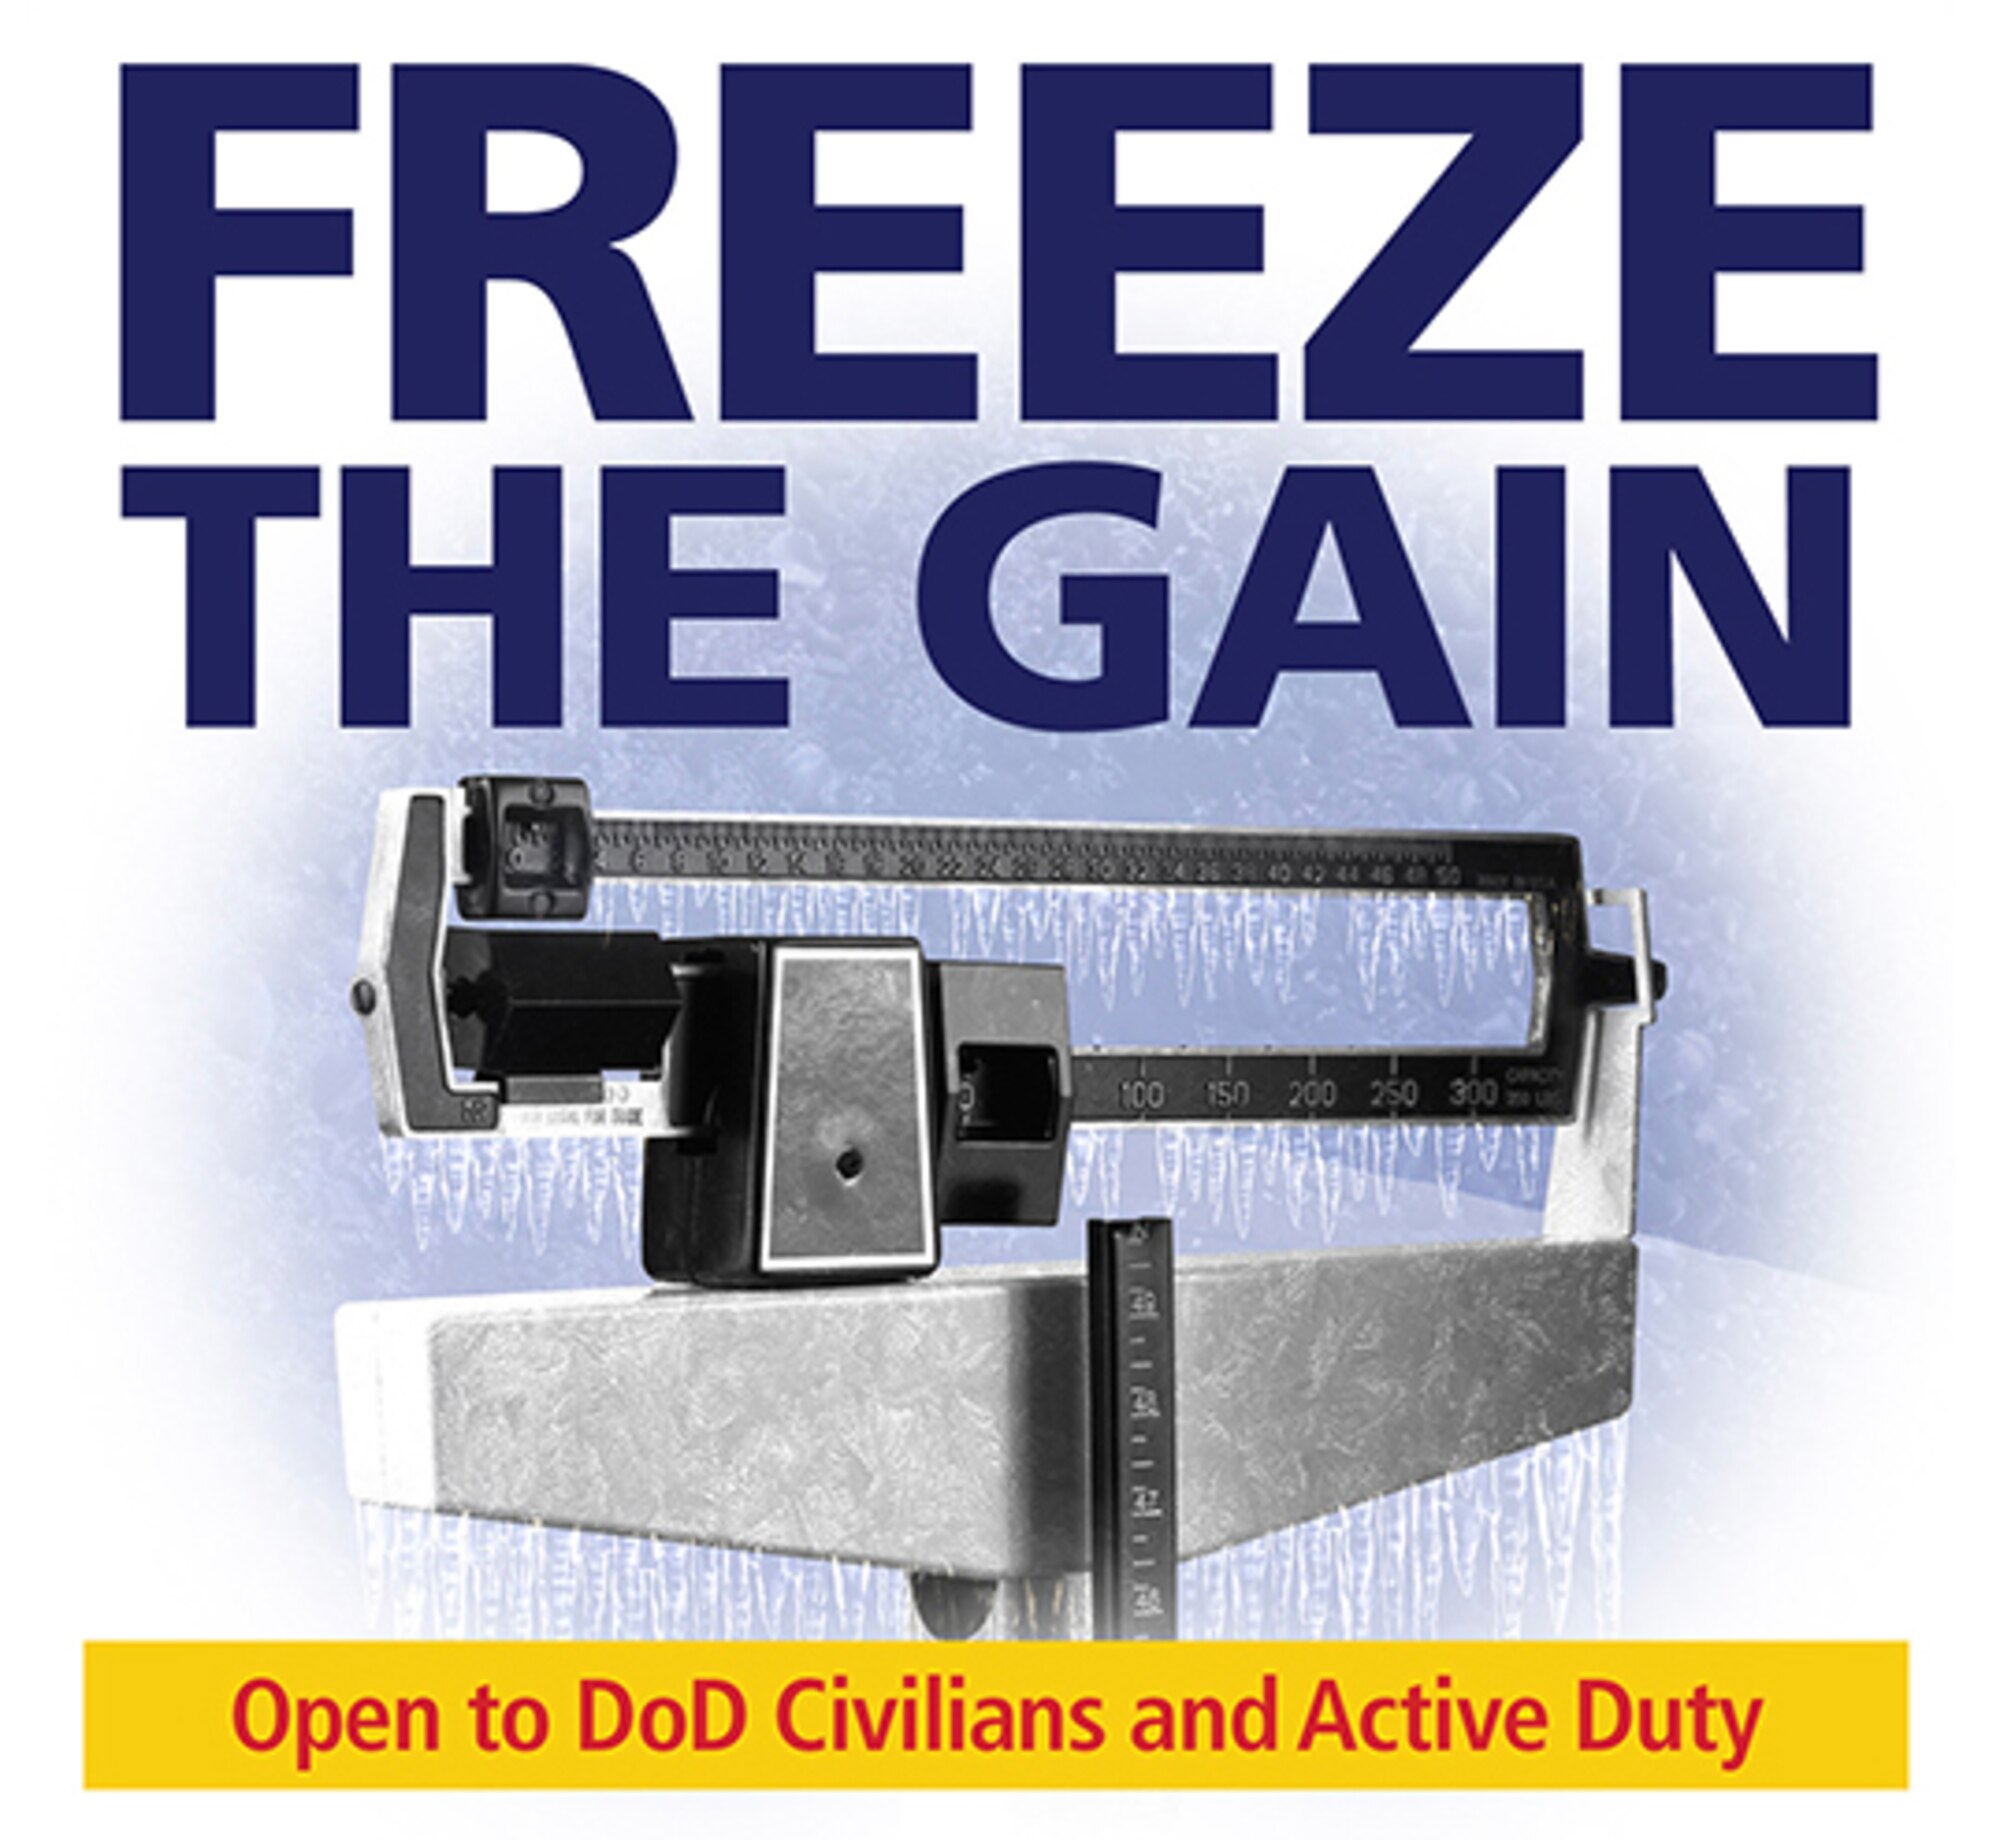 During the holiday season, Air Force Materiel Command will promote the Freeze the Gain Challenge to help the AFMC workforce prevent and control high blood pressure.